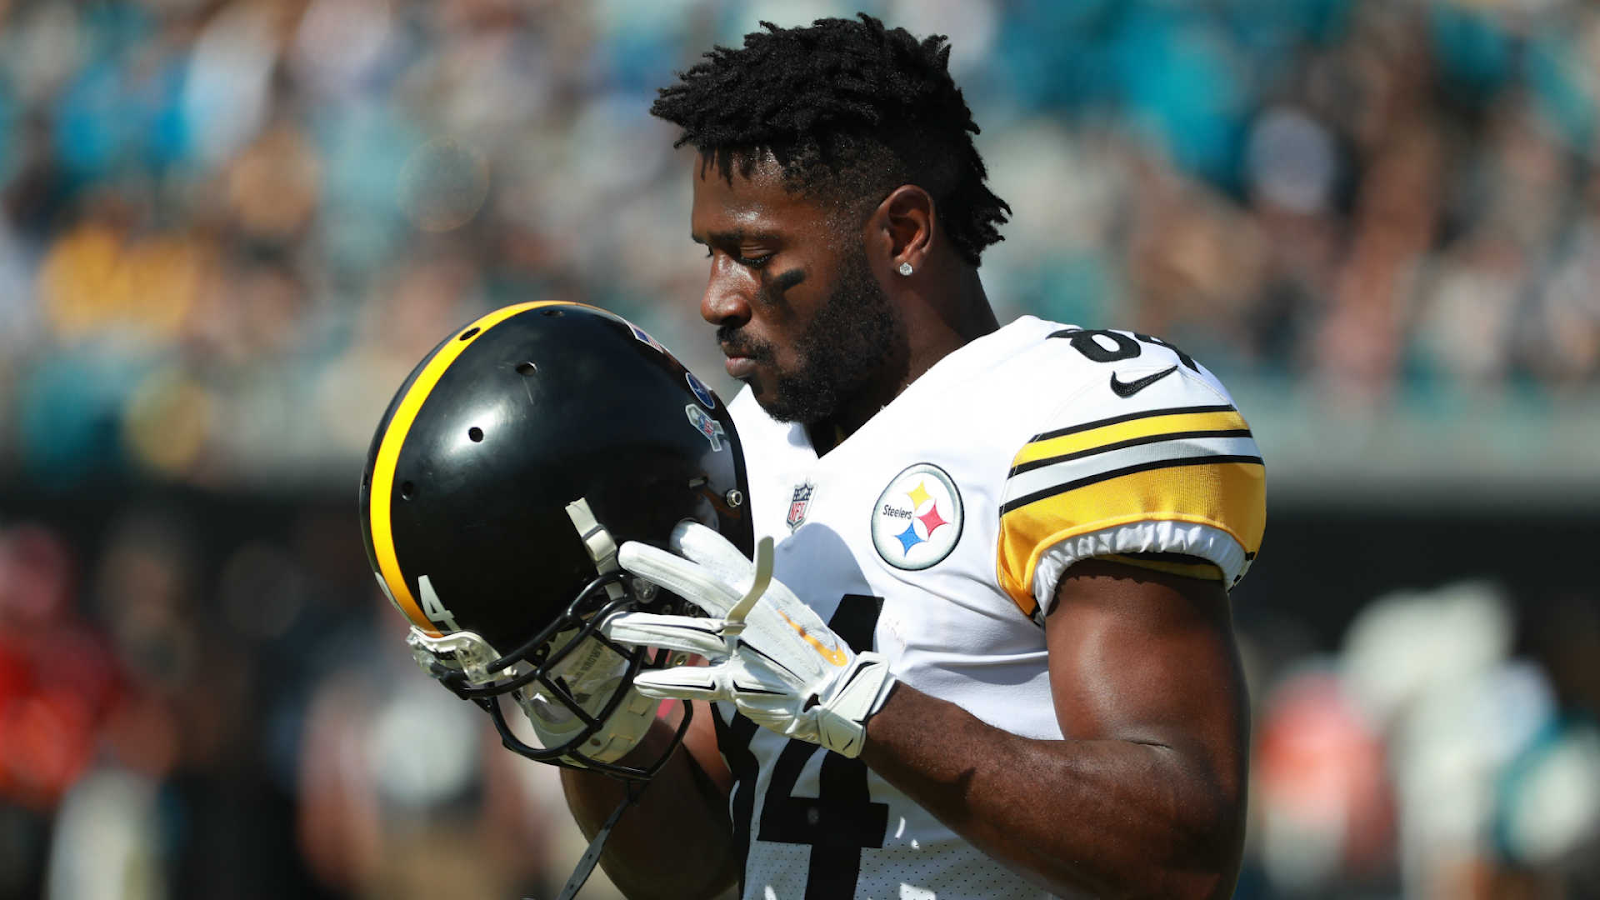 Antonio Brown Can't Wait For Adversities to Go Away and Start Playing